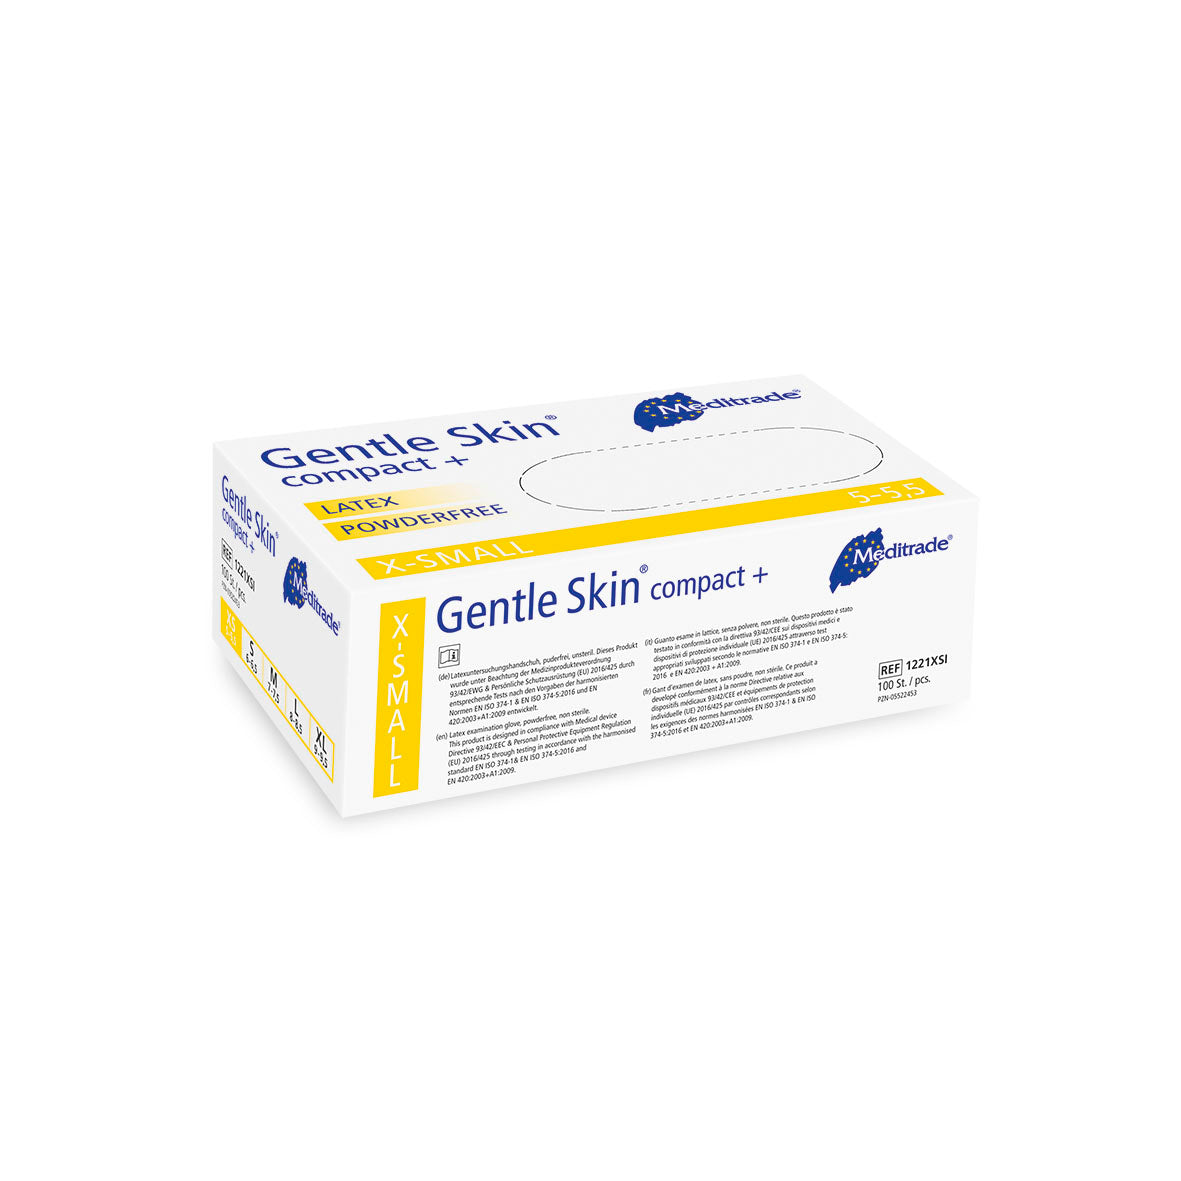 Gentle Skin compact+ Latex Gloves Powder Free Extra Small